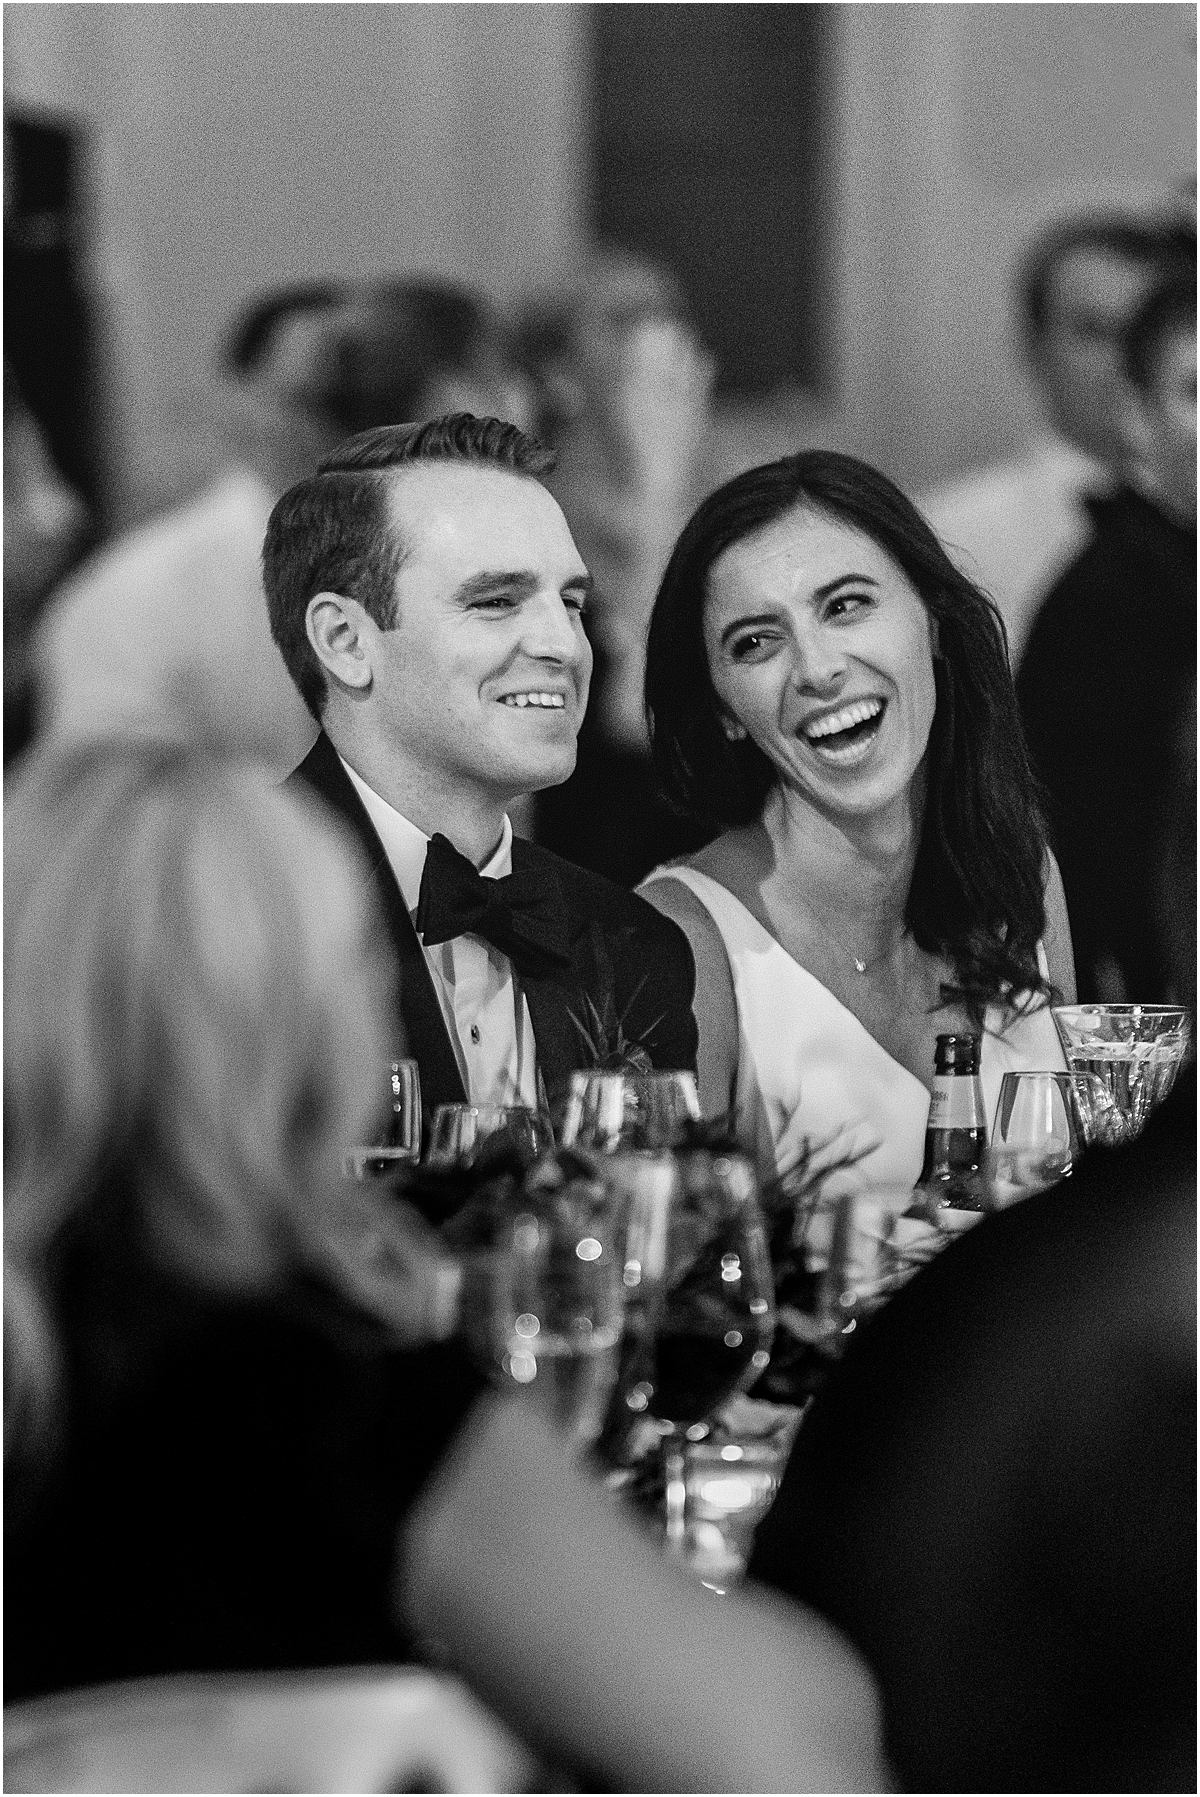 newlyweds laugh during wedding toasts at Chicago wedding reception at Four Seasons Hotel  